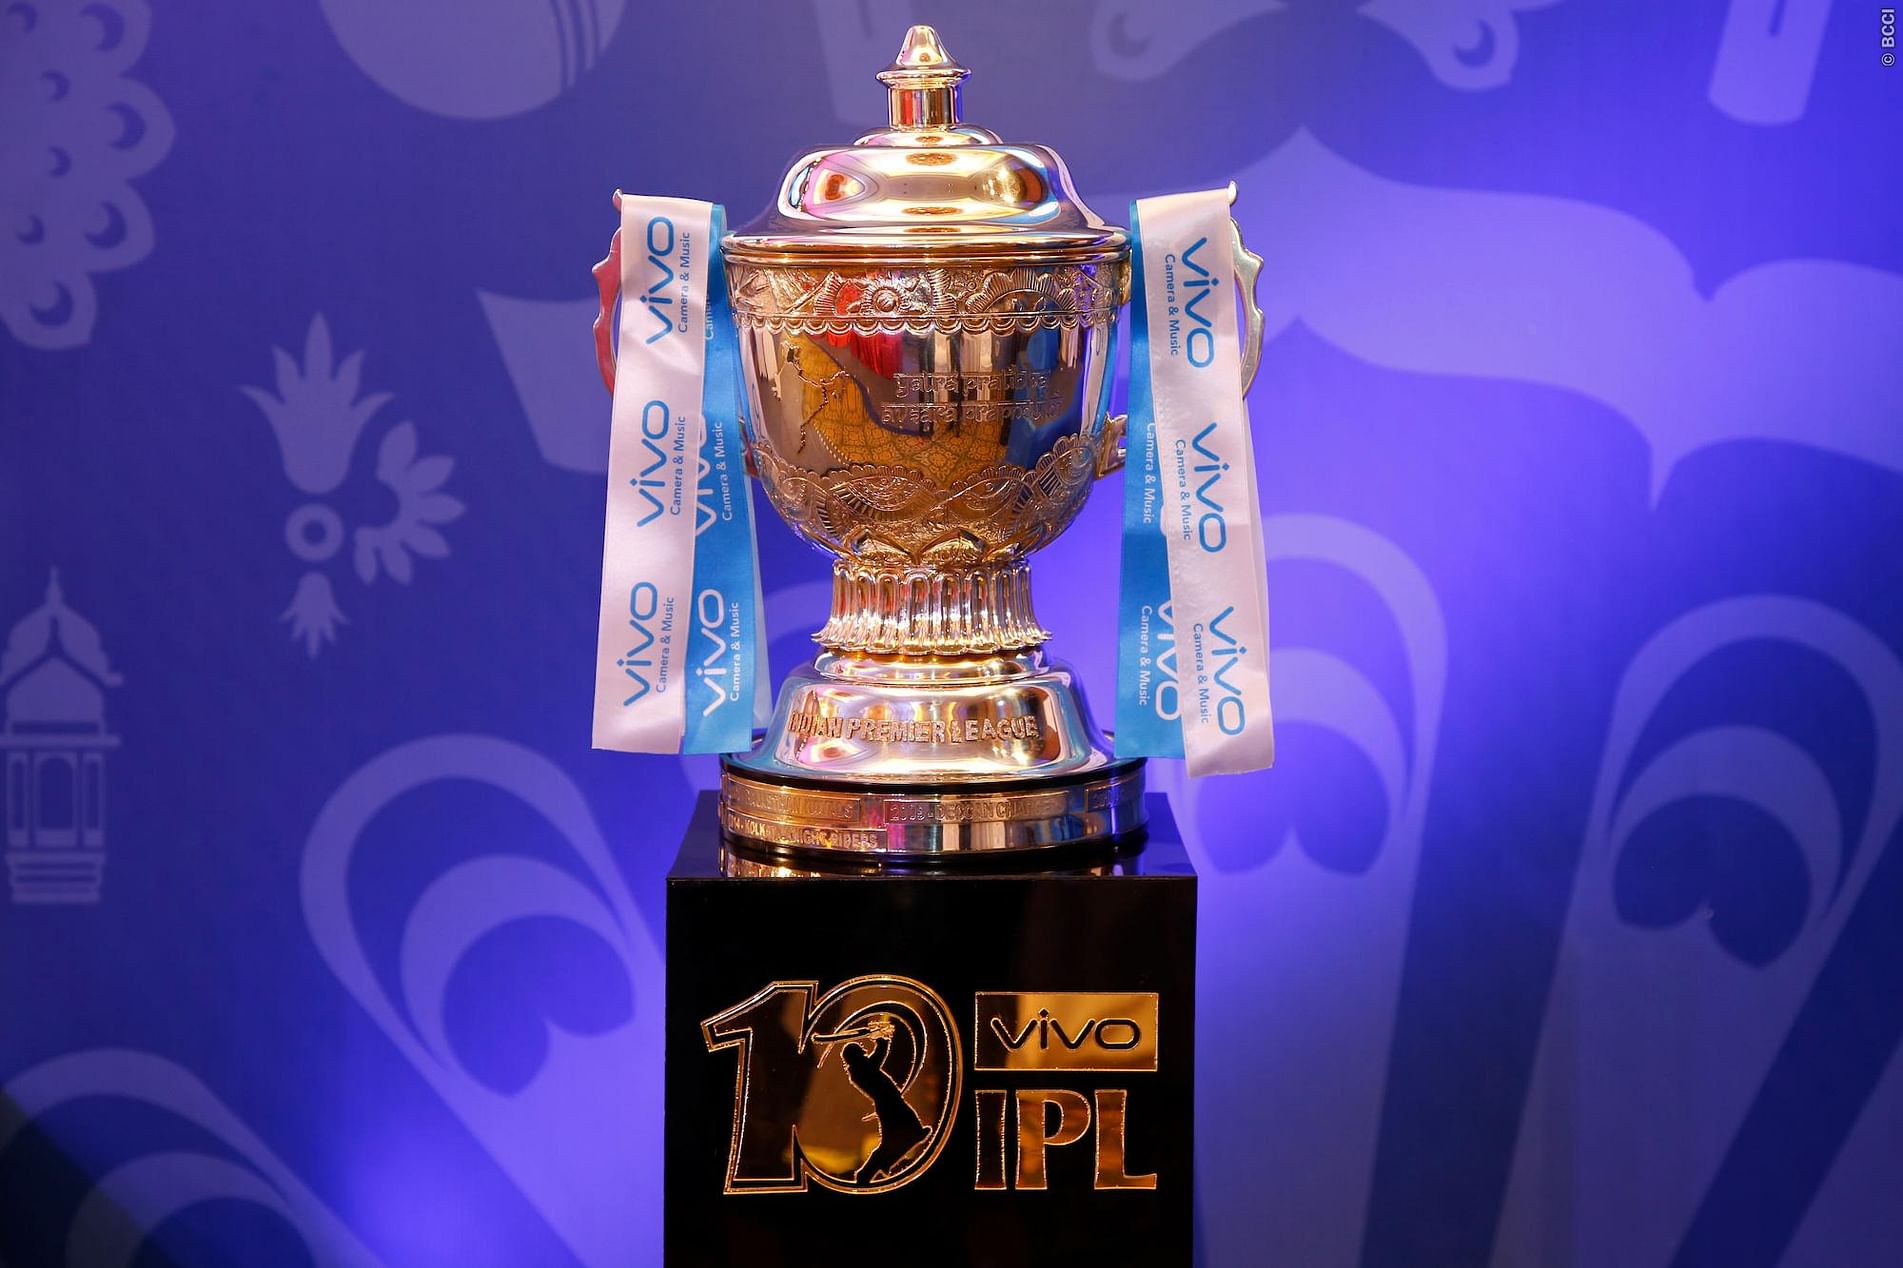 IPL 14 was suspended after several COVID-19 cases were found inside bio-bubble | AFP